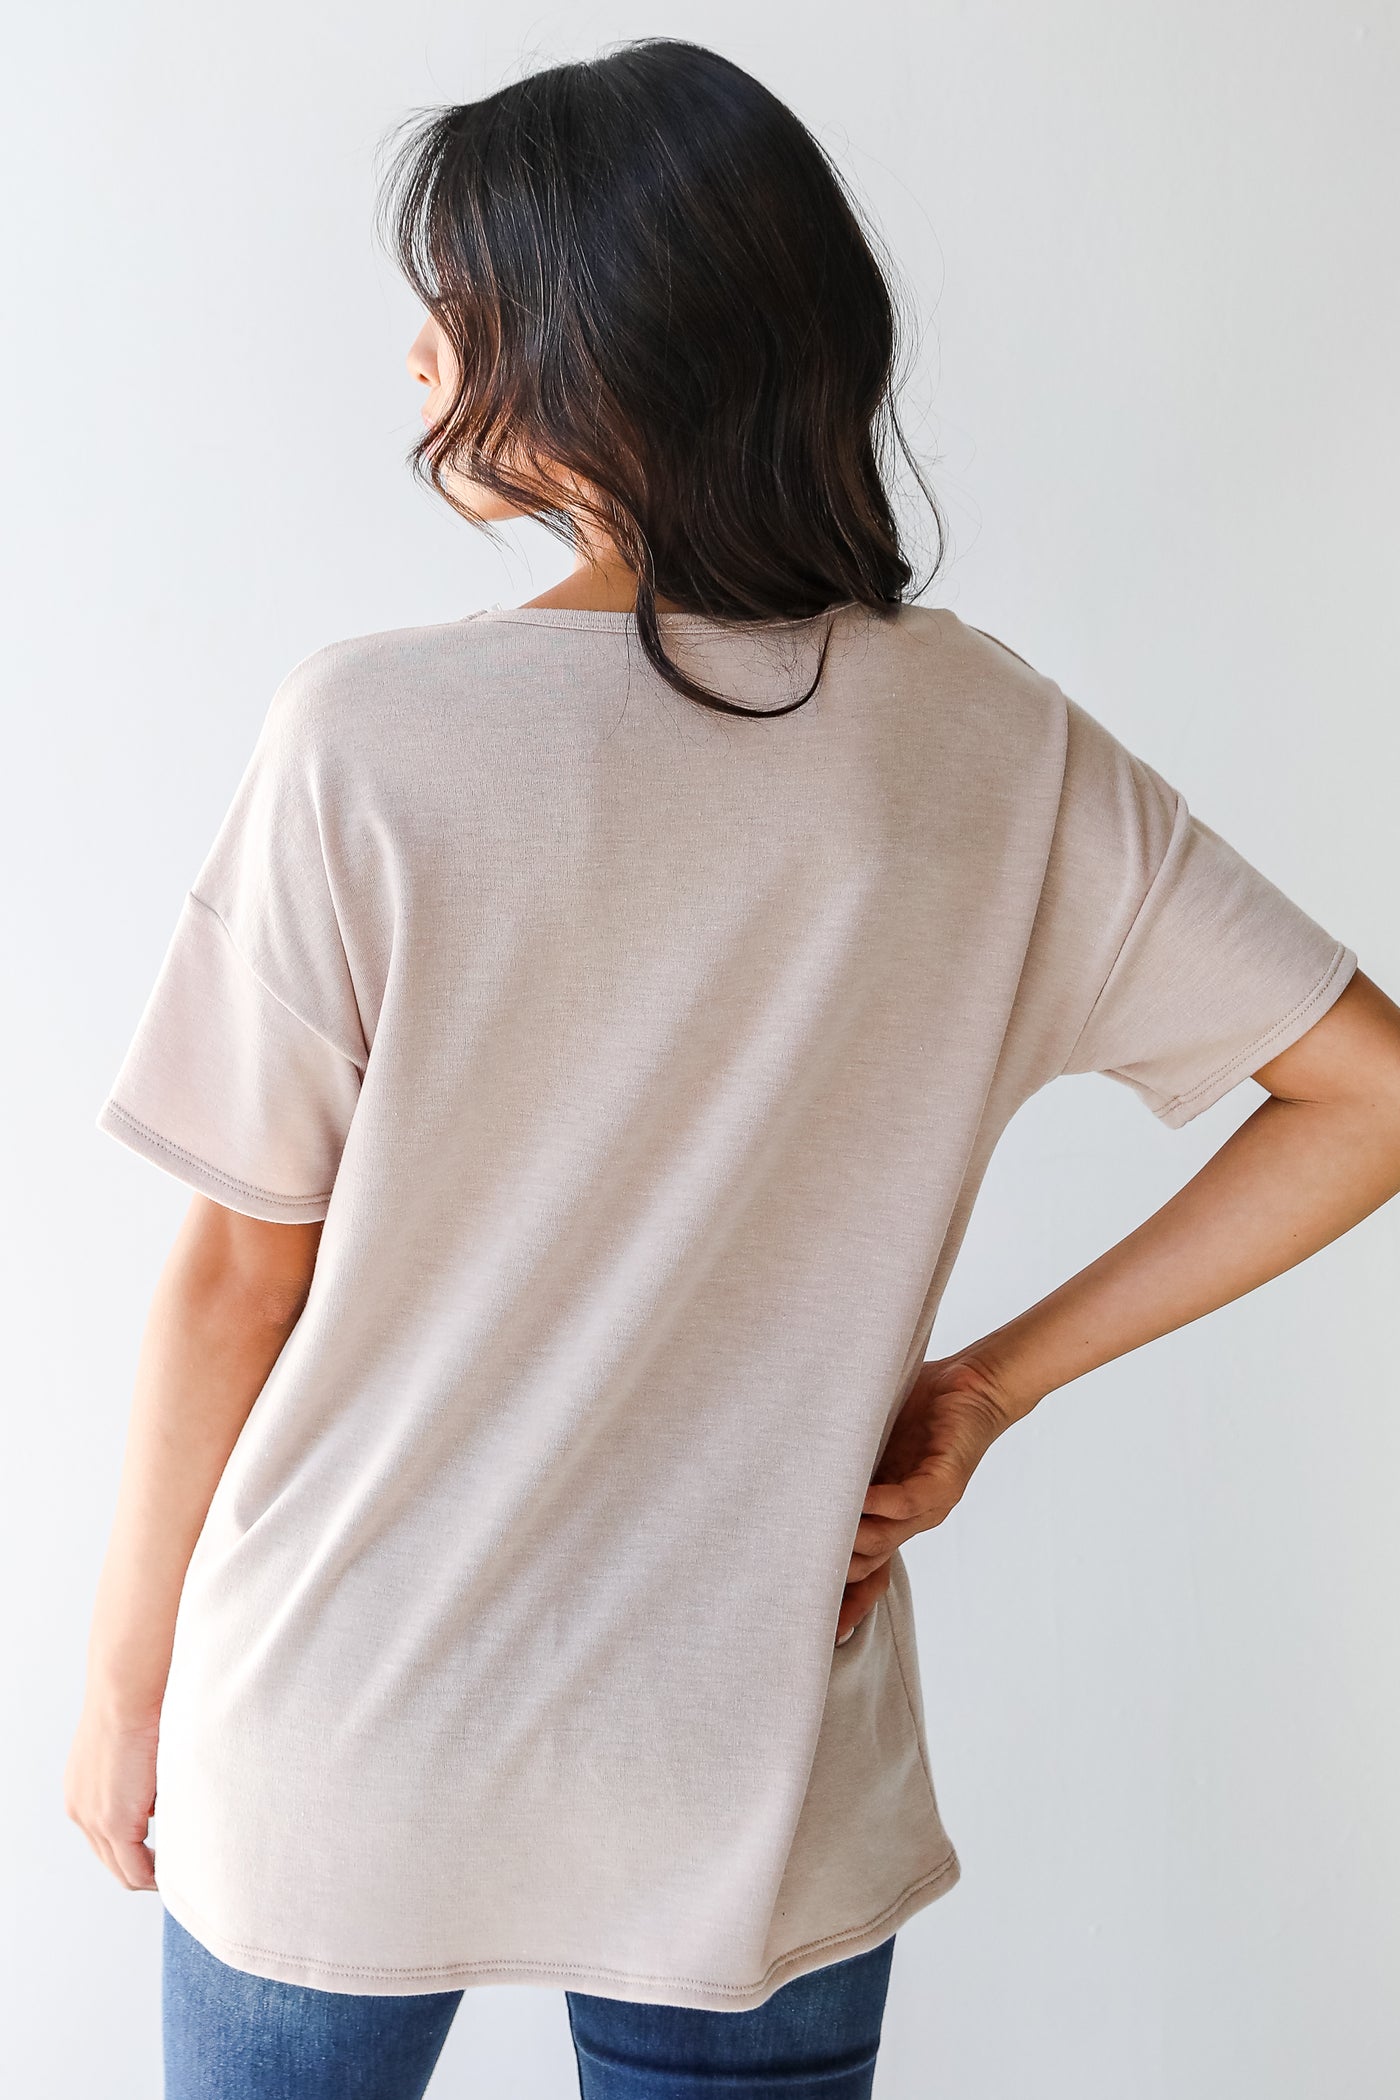 Leopard Star Tee in taupe back view